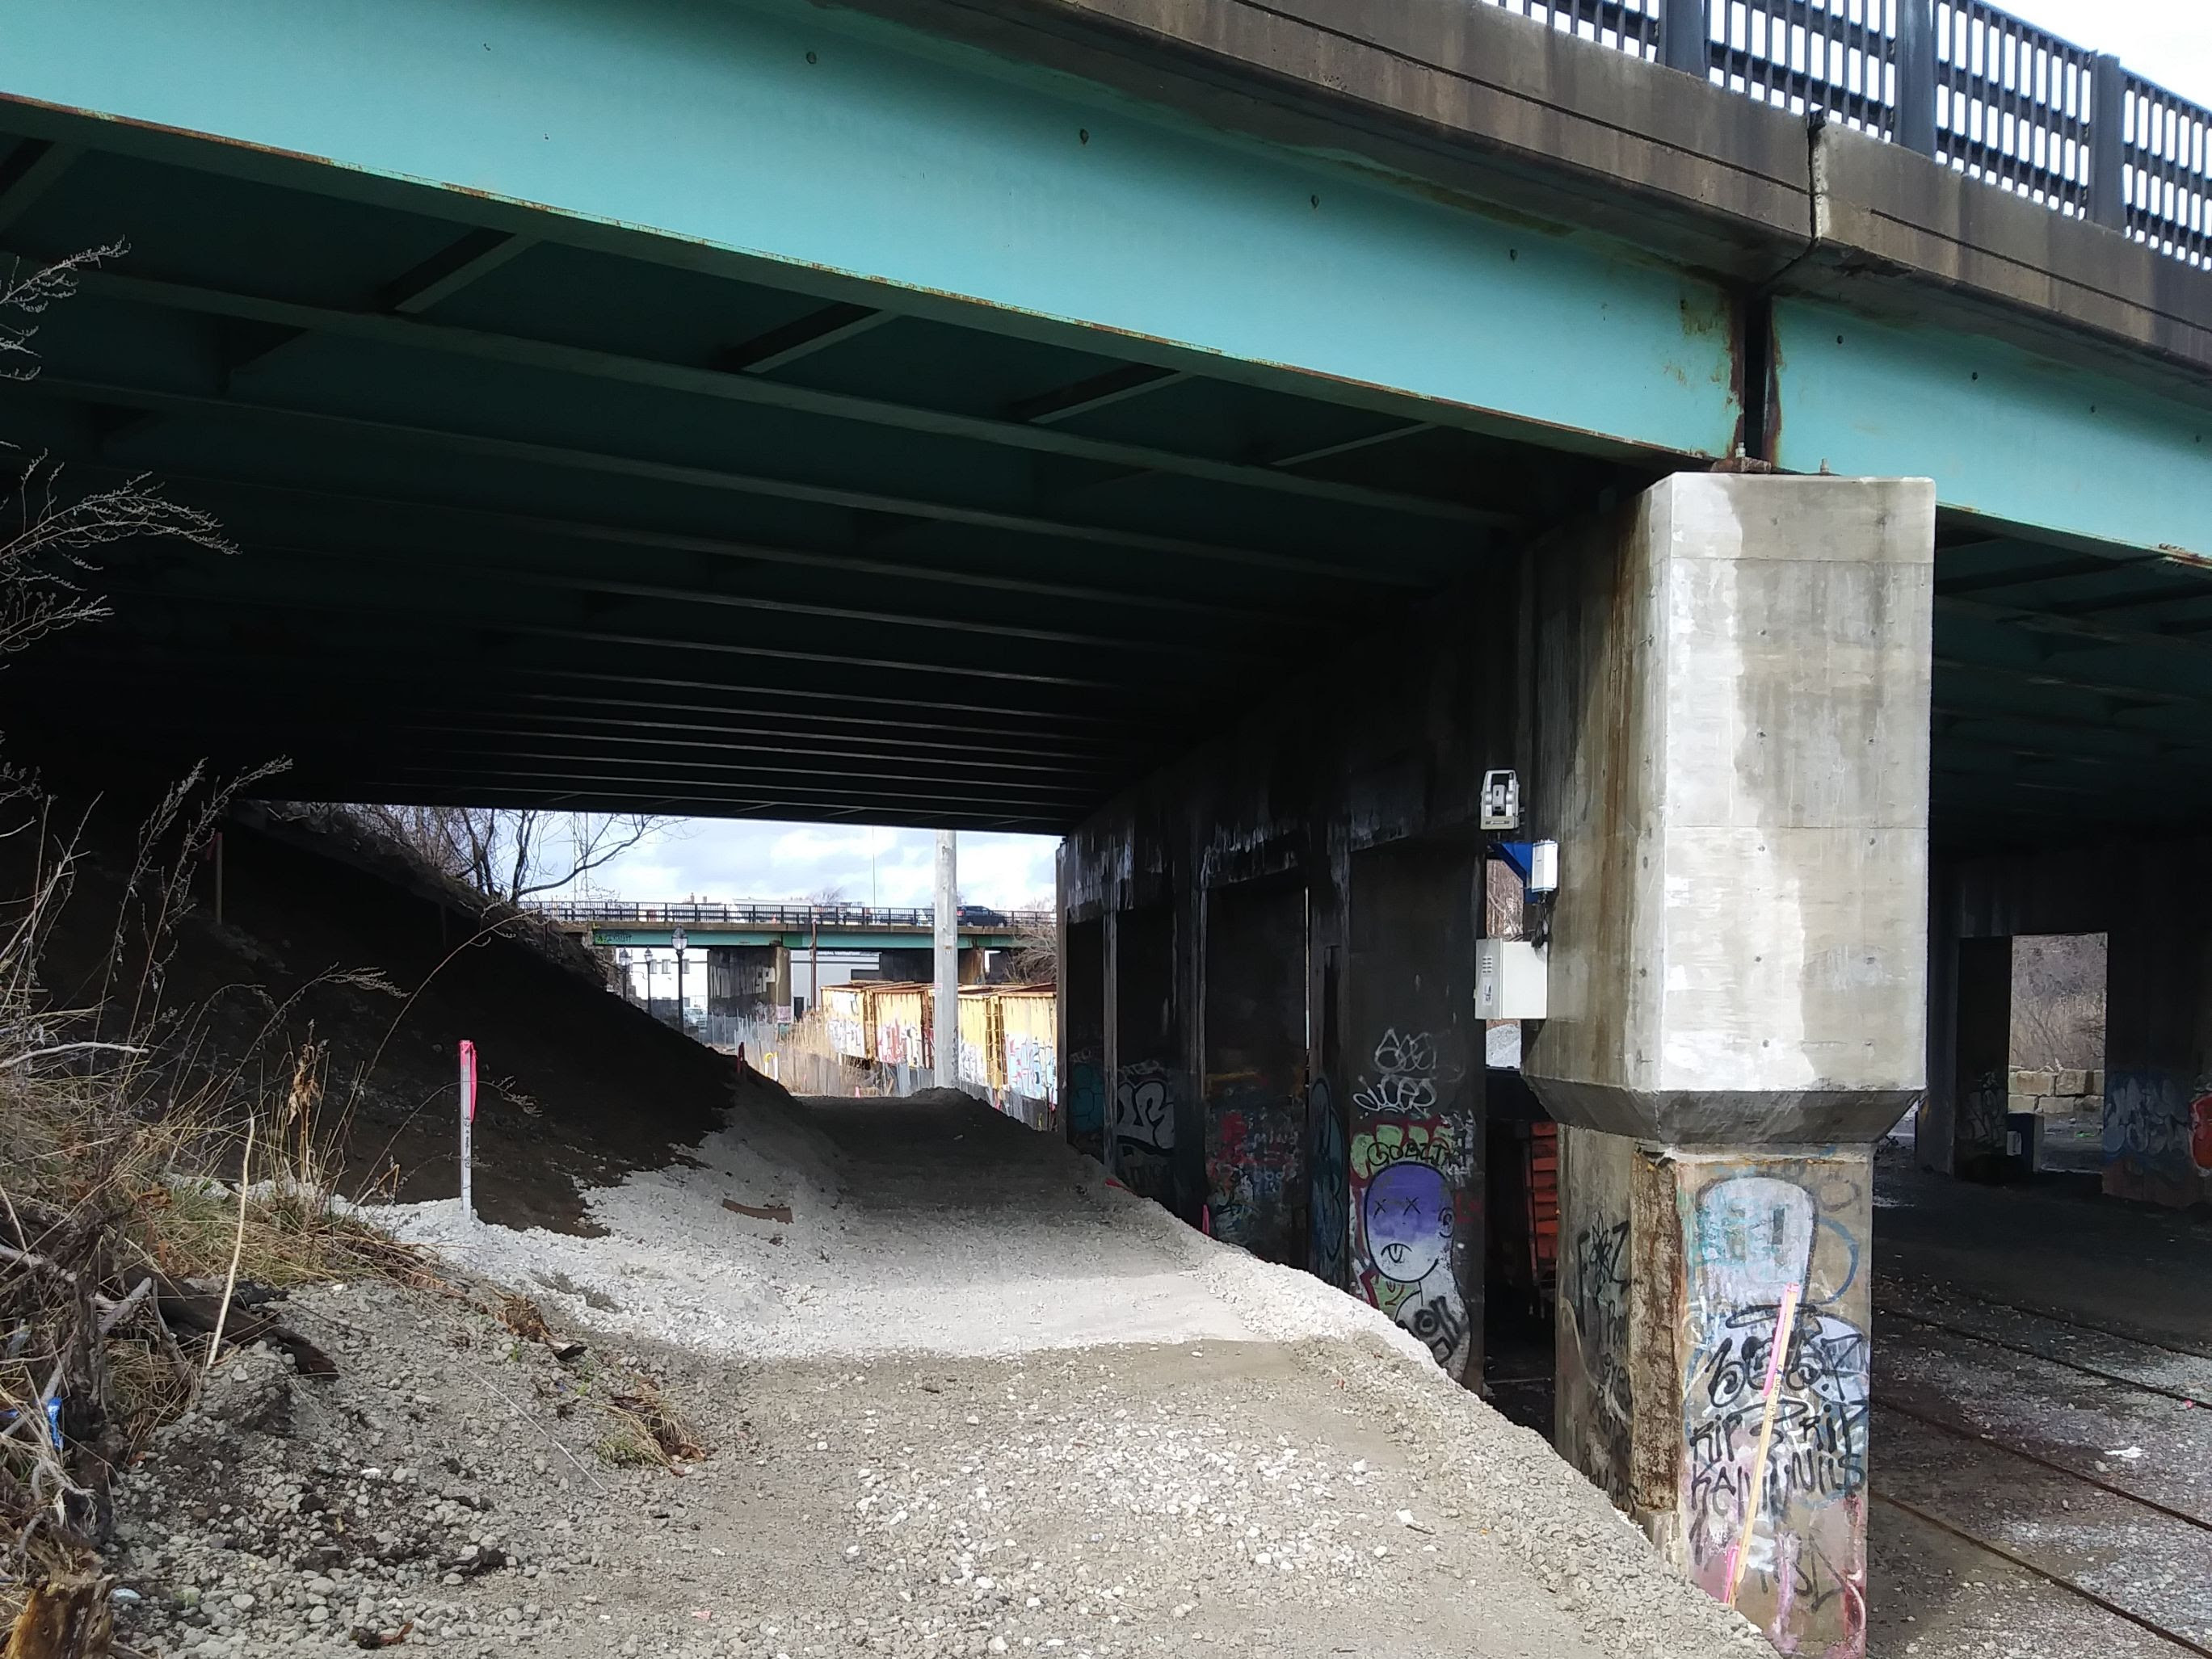 A graded gravel path under construction runs underneath a highway bridge next to a concrete bridge abutment. To the right of the abutment and below the trail are some railroad tracks.